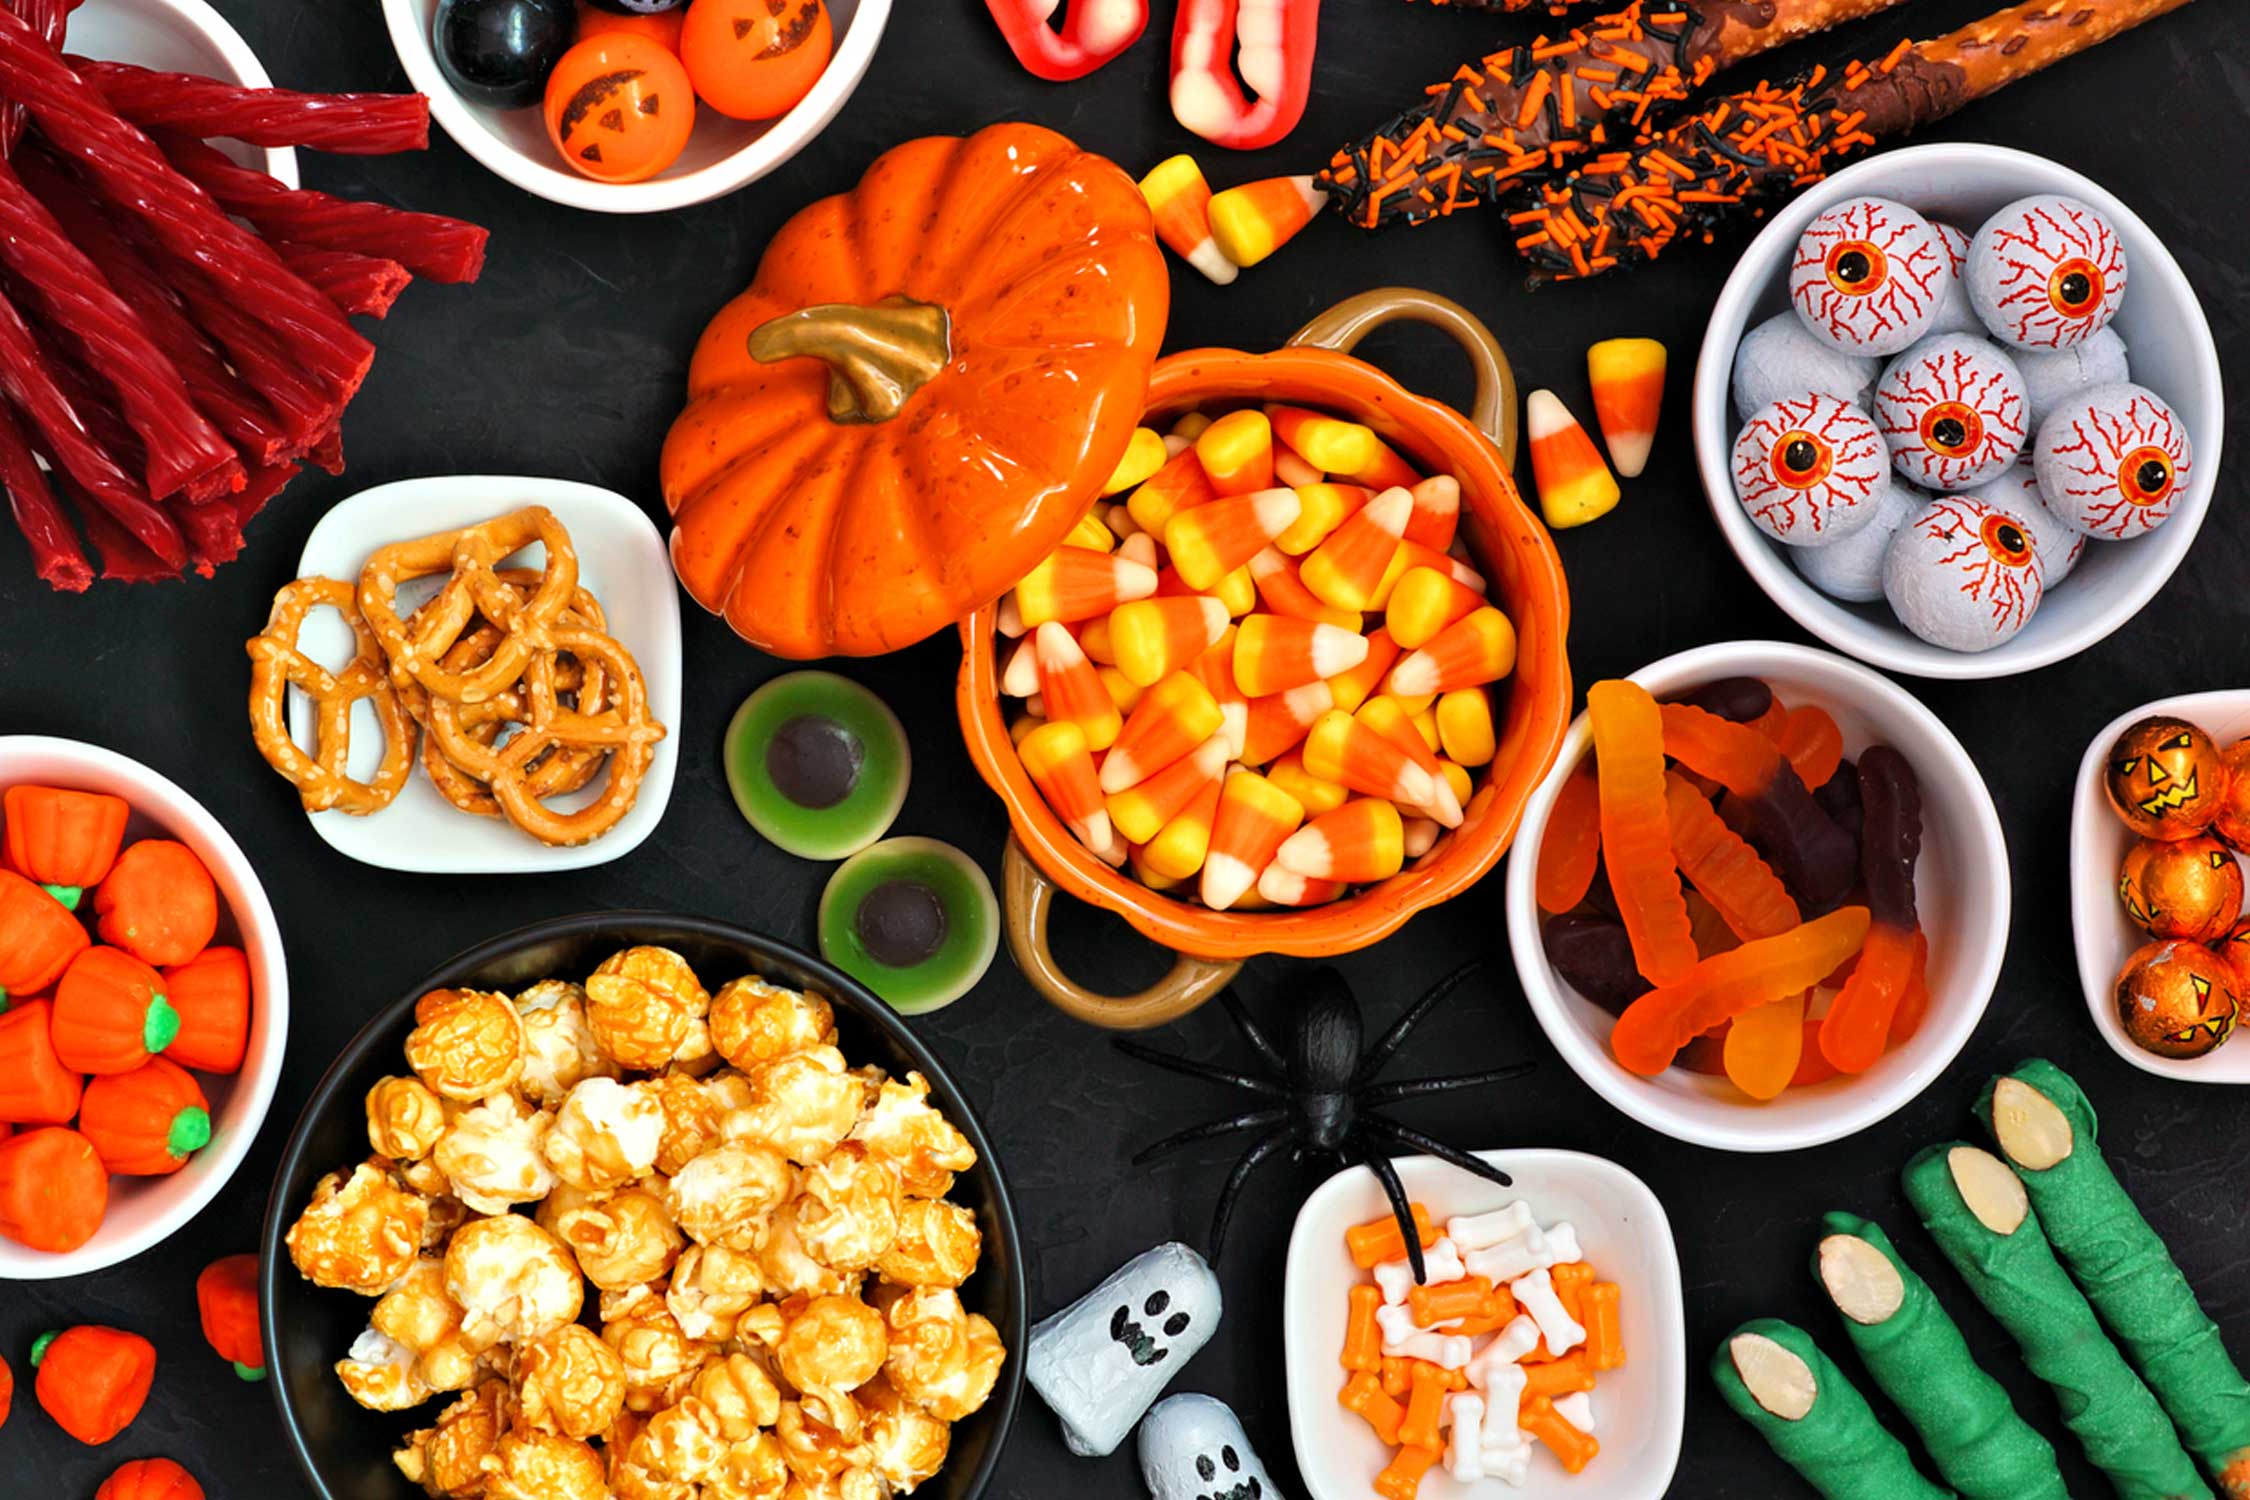 Get Creative with Halloween Party Supplies